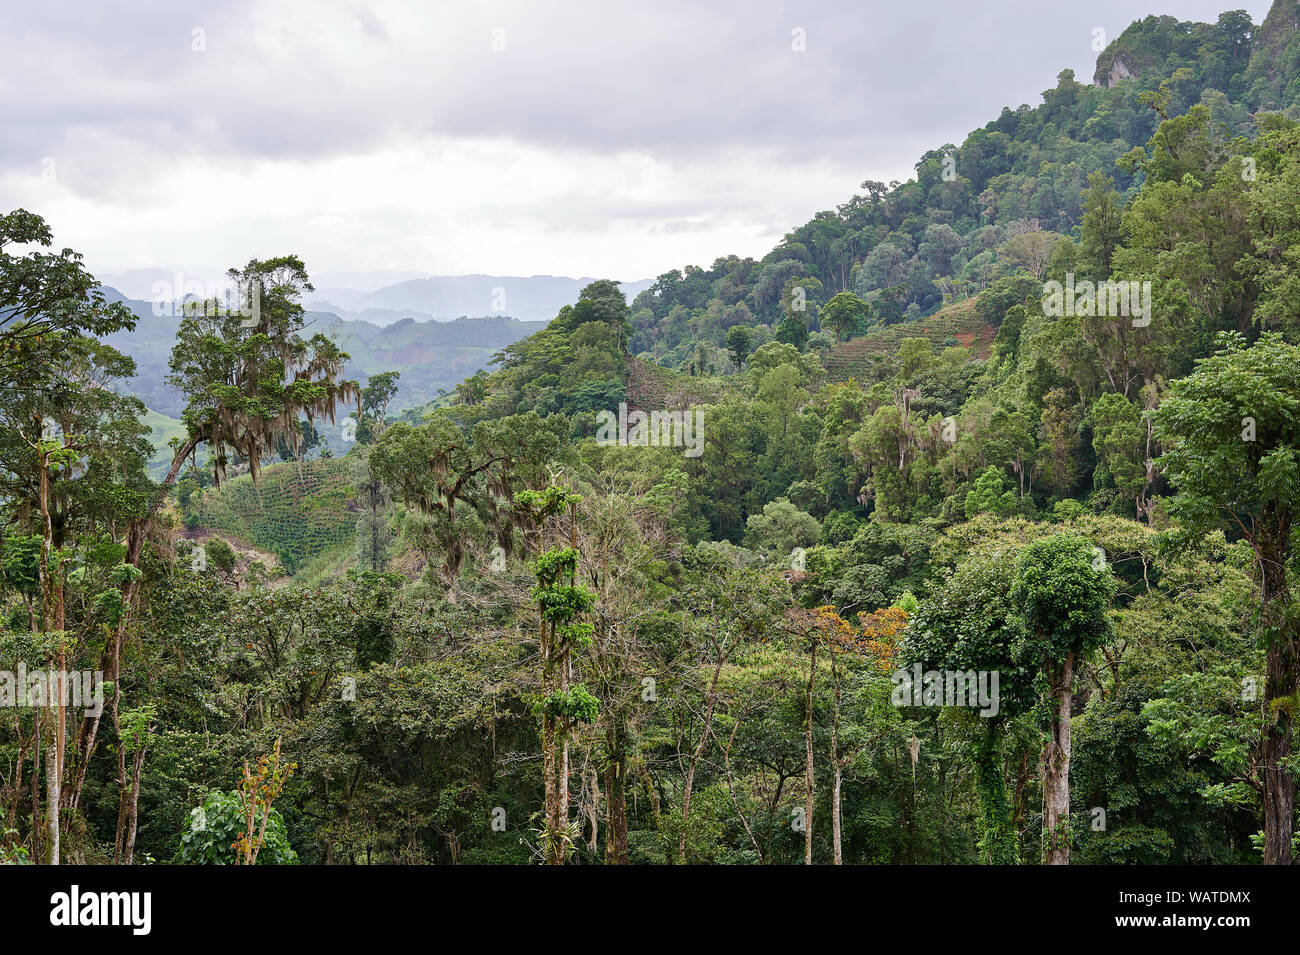 Jungle on mountains with coffee plantation panoramic view Stock Photo